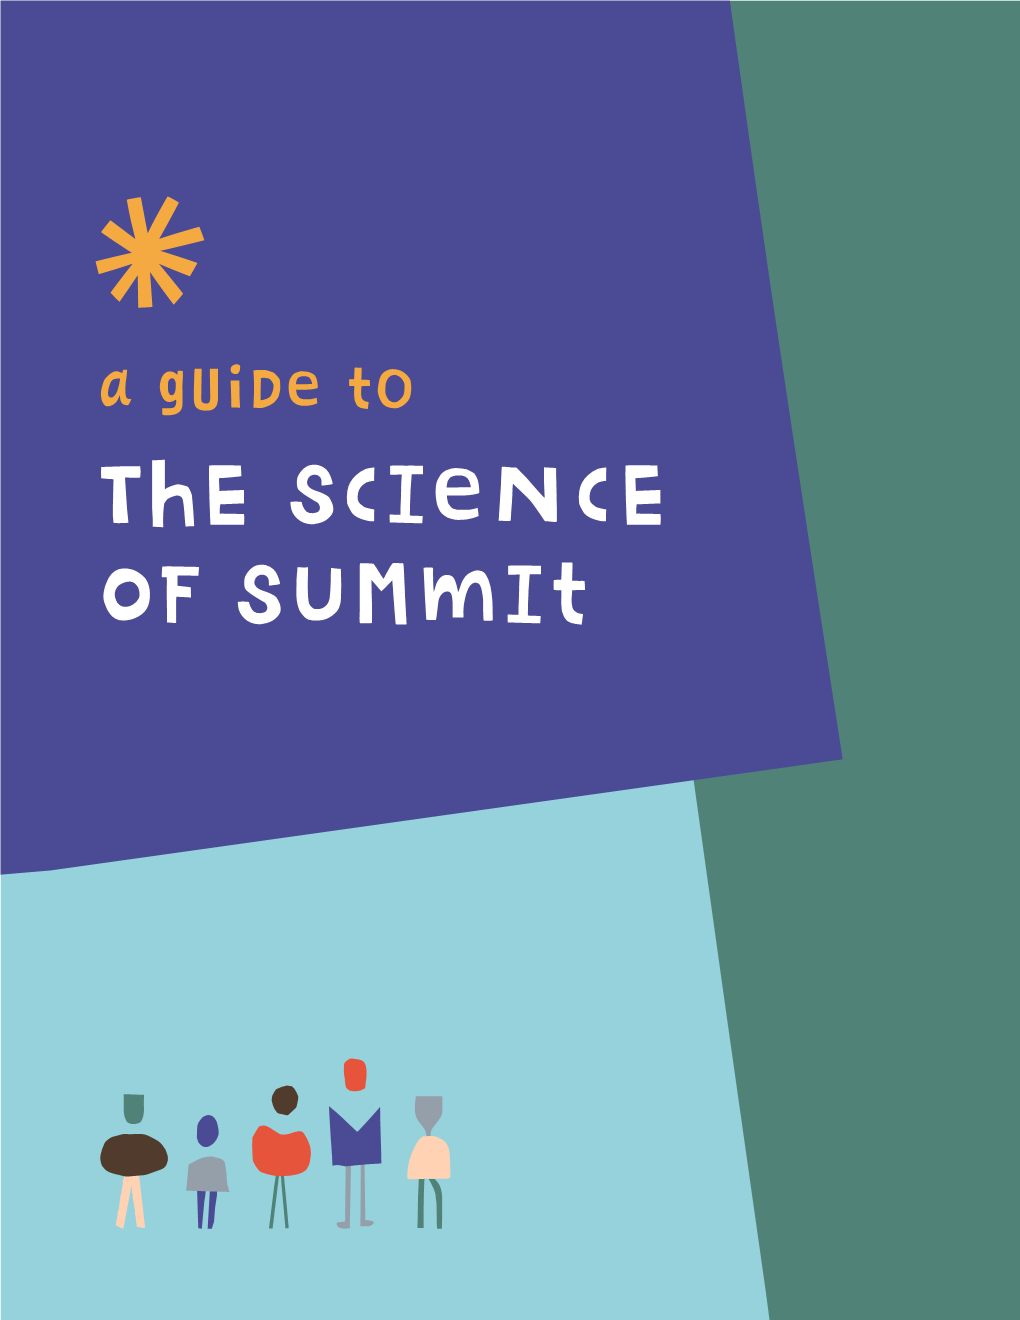 The Science of Summit